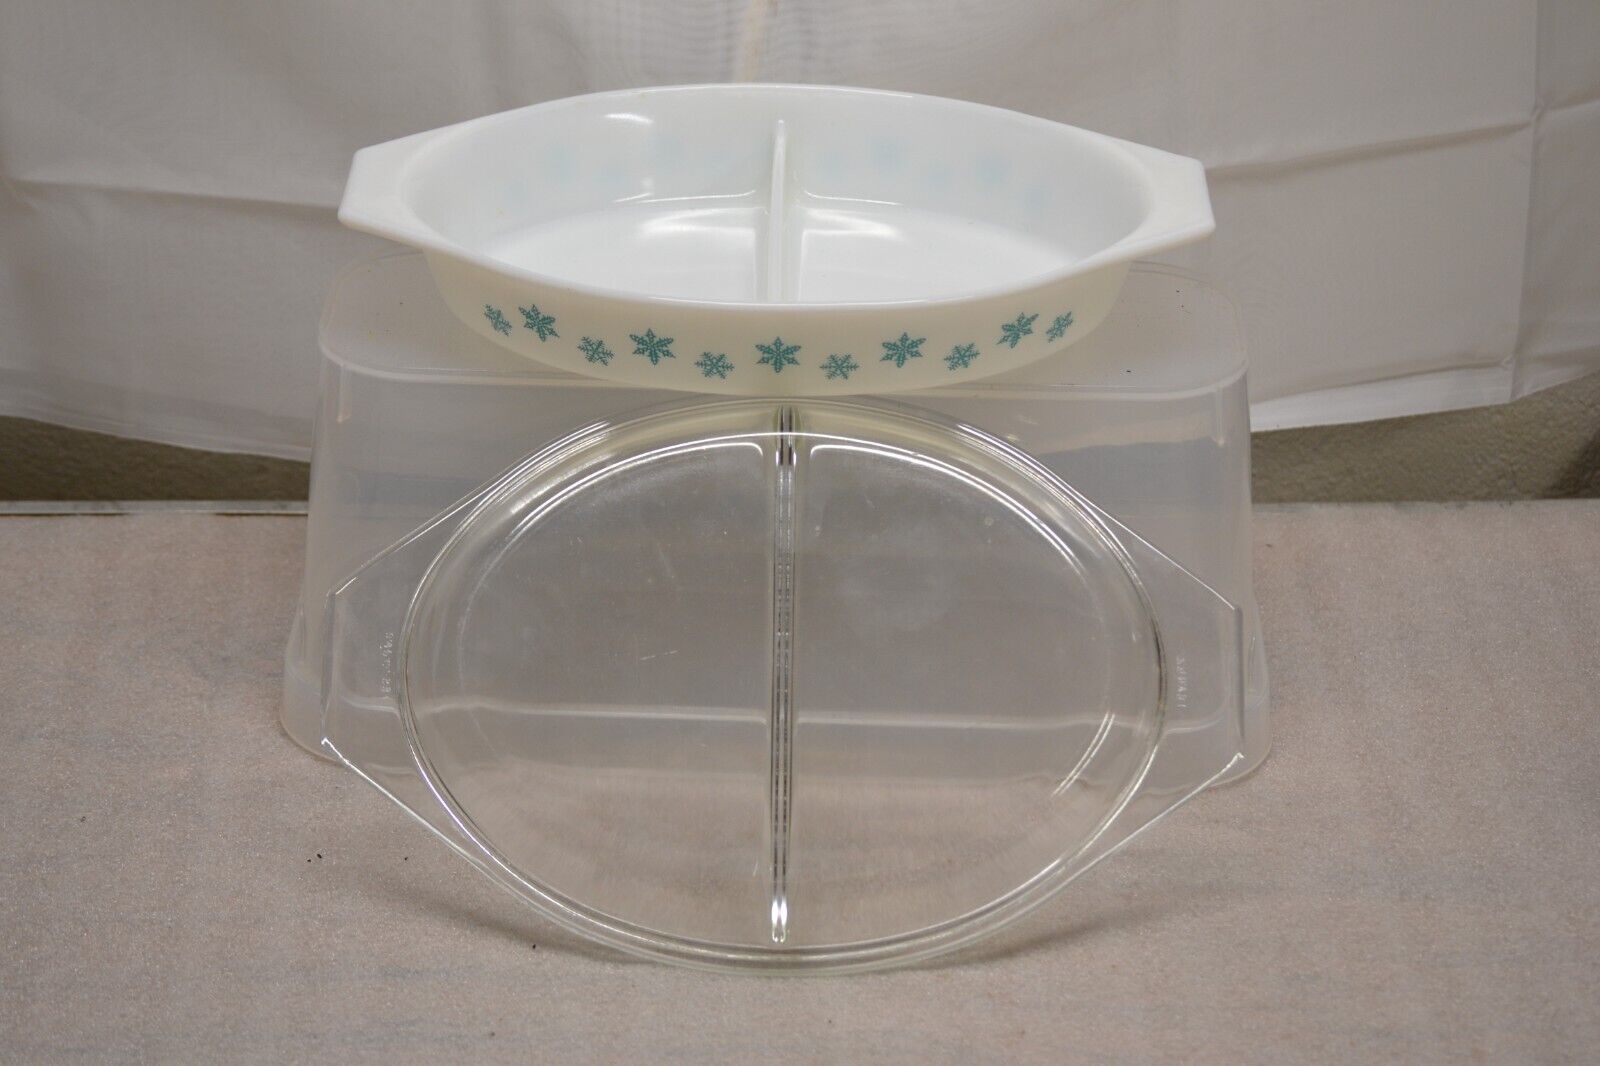 VINTAGE PYREX DIVIDED CASSROLE BOWL WHITE BLUE SNOW FLAKE WITH LID1.5 QT. USA